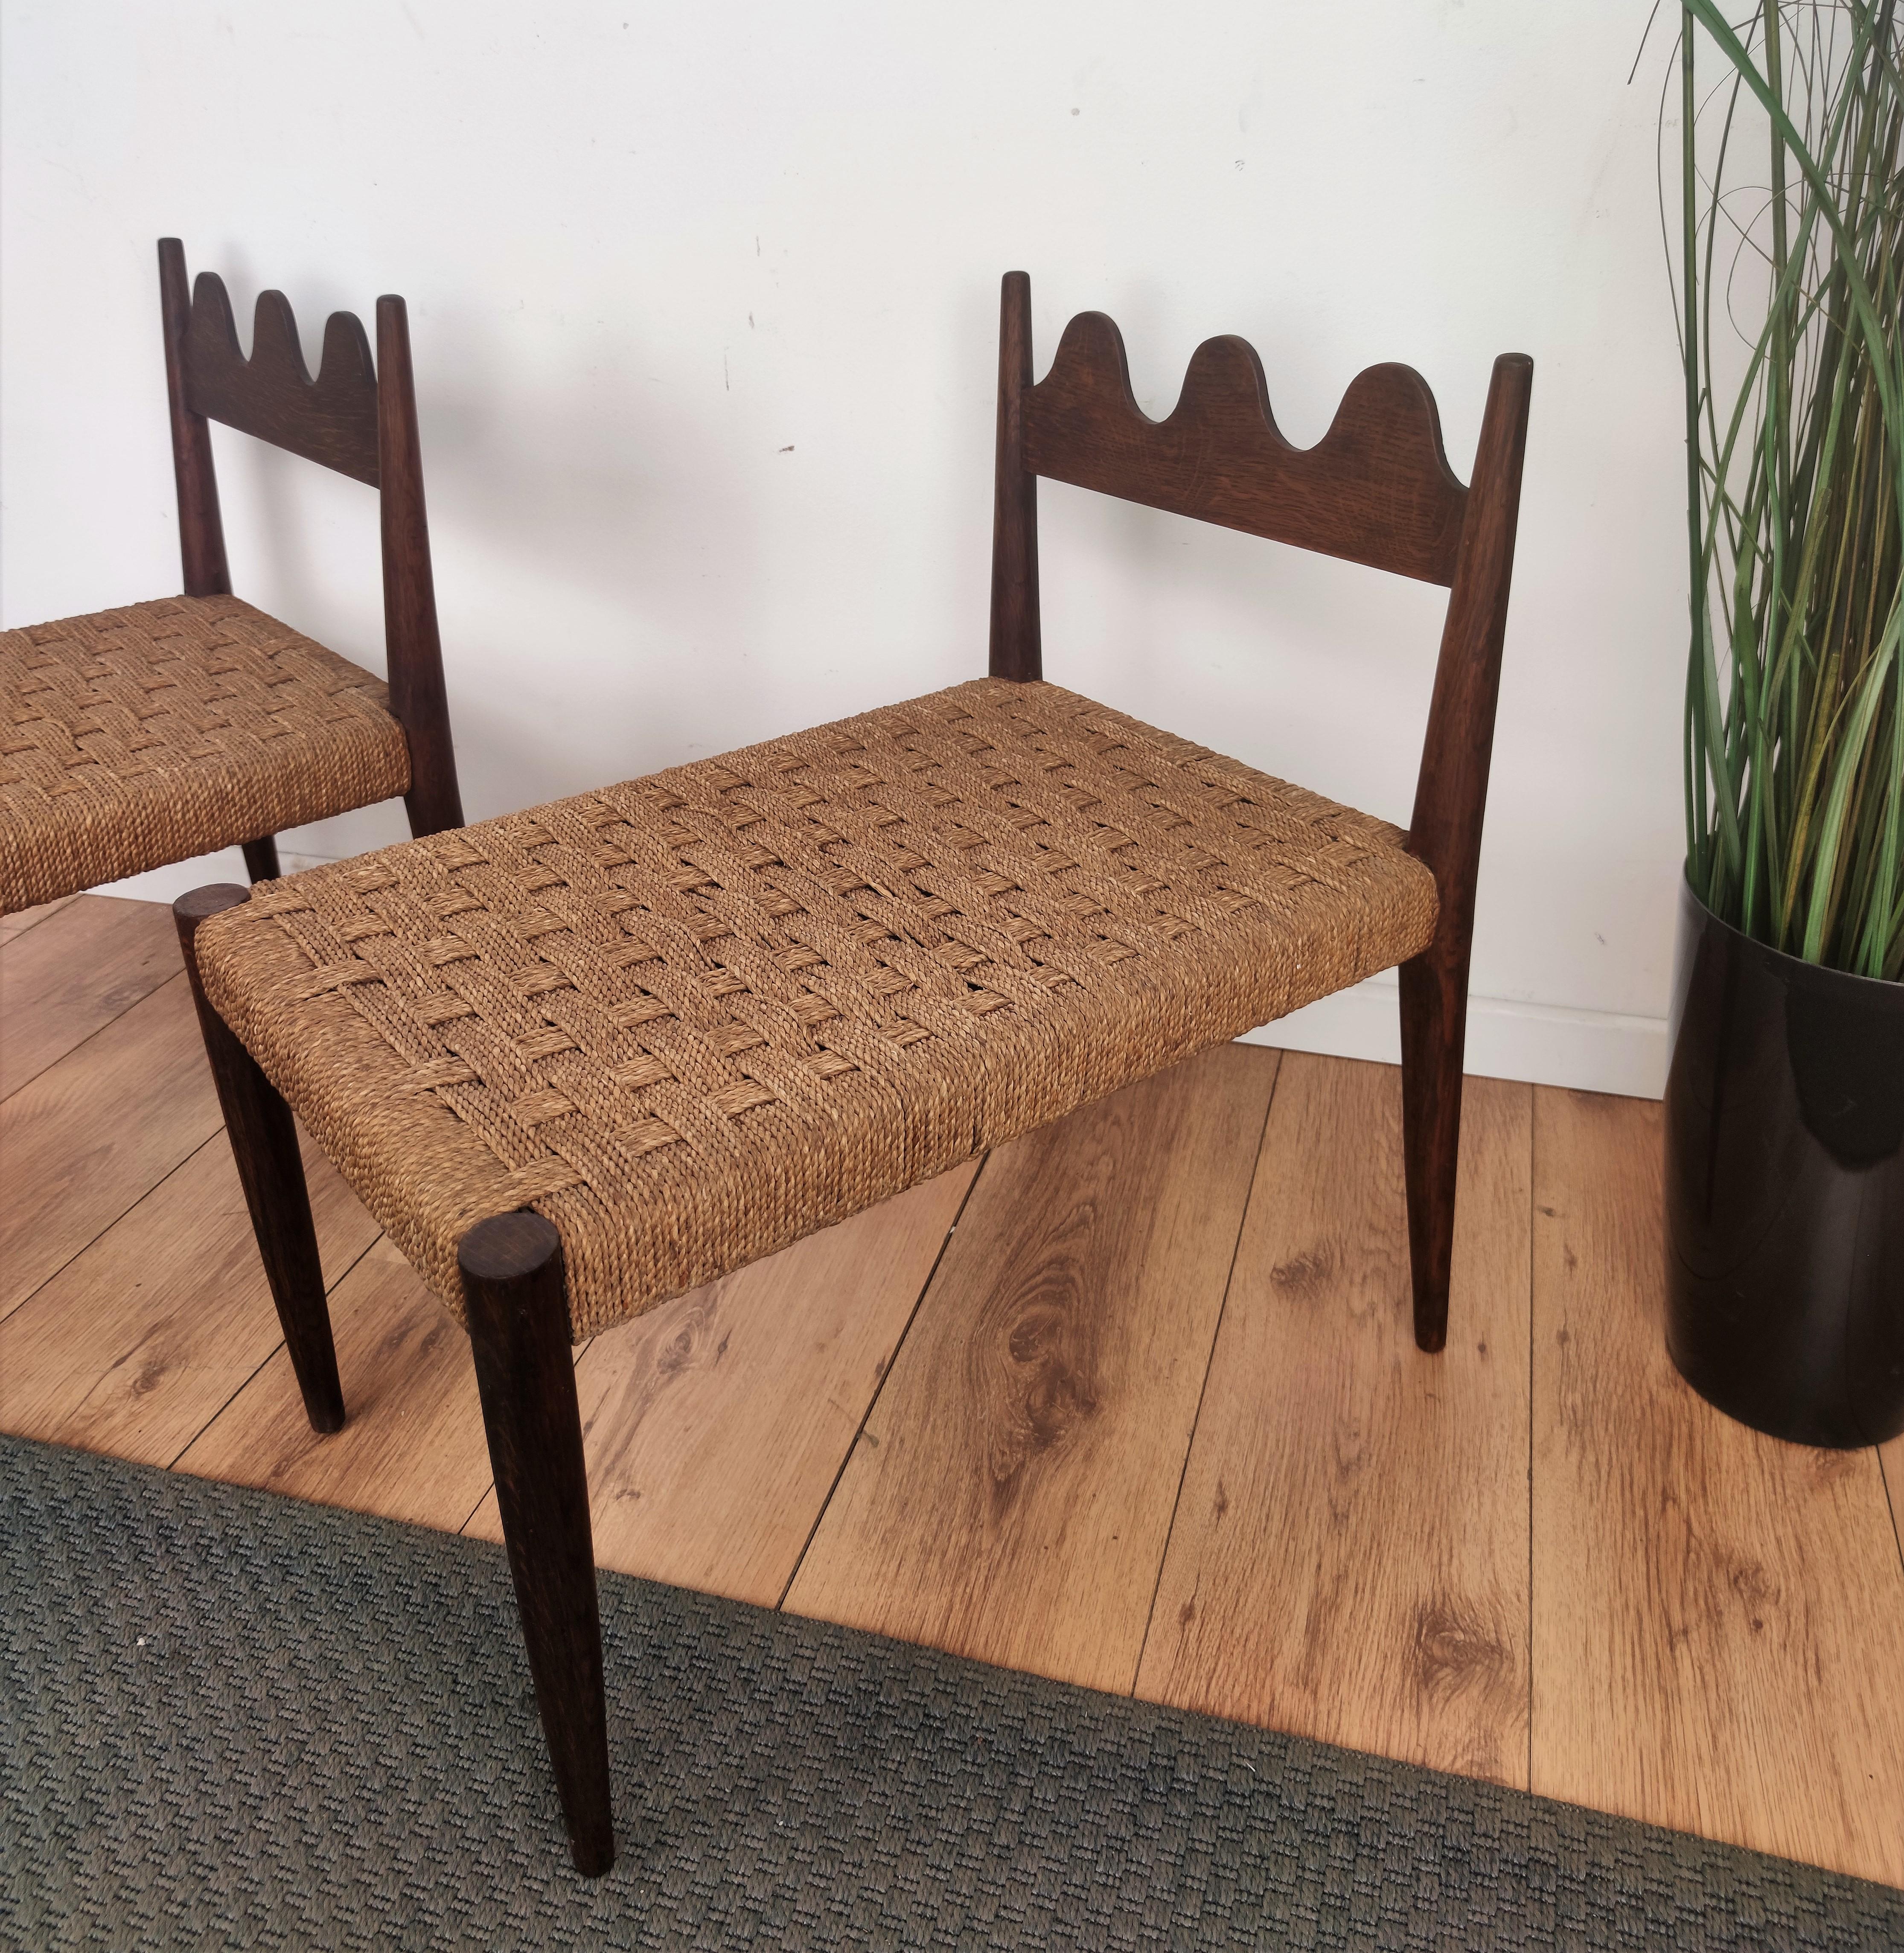 Pair of 1960s Italian Midcentury Carved Wood and Cord Woven Rope Chairs Stools 1